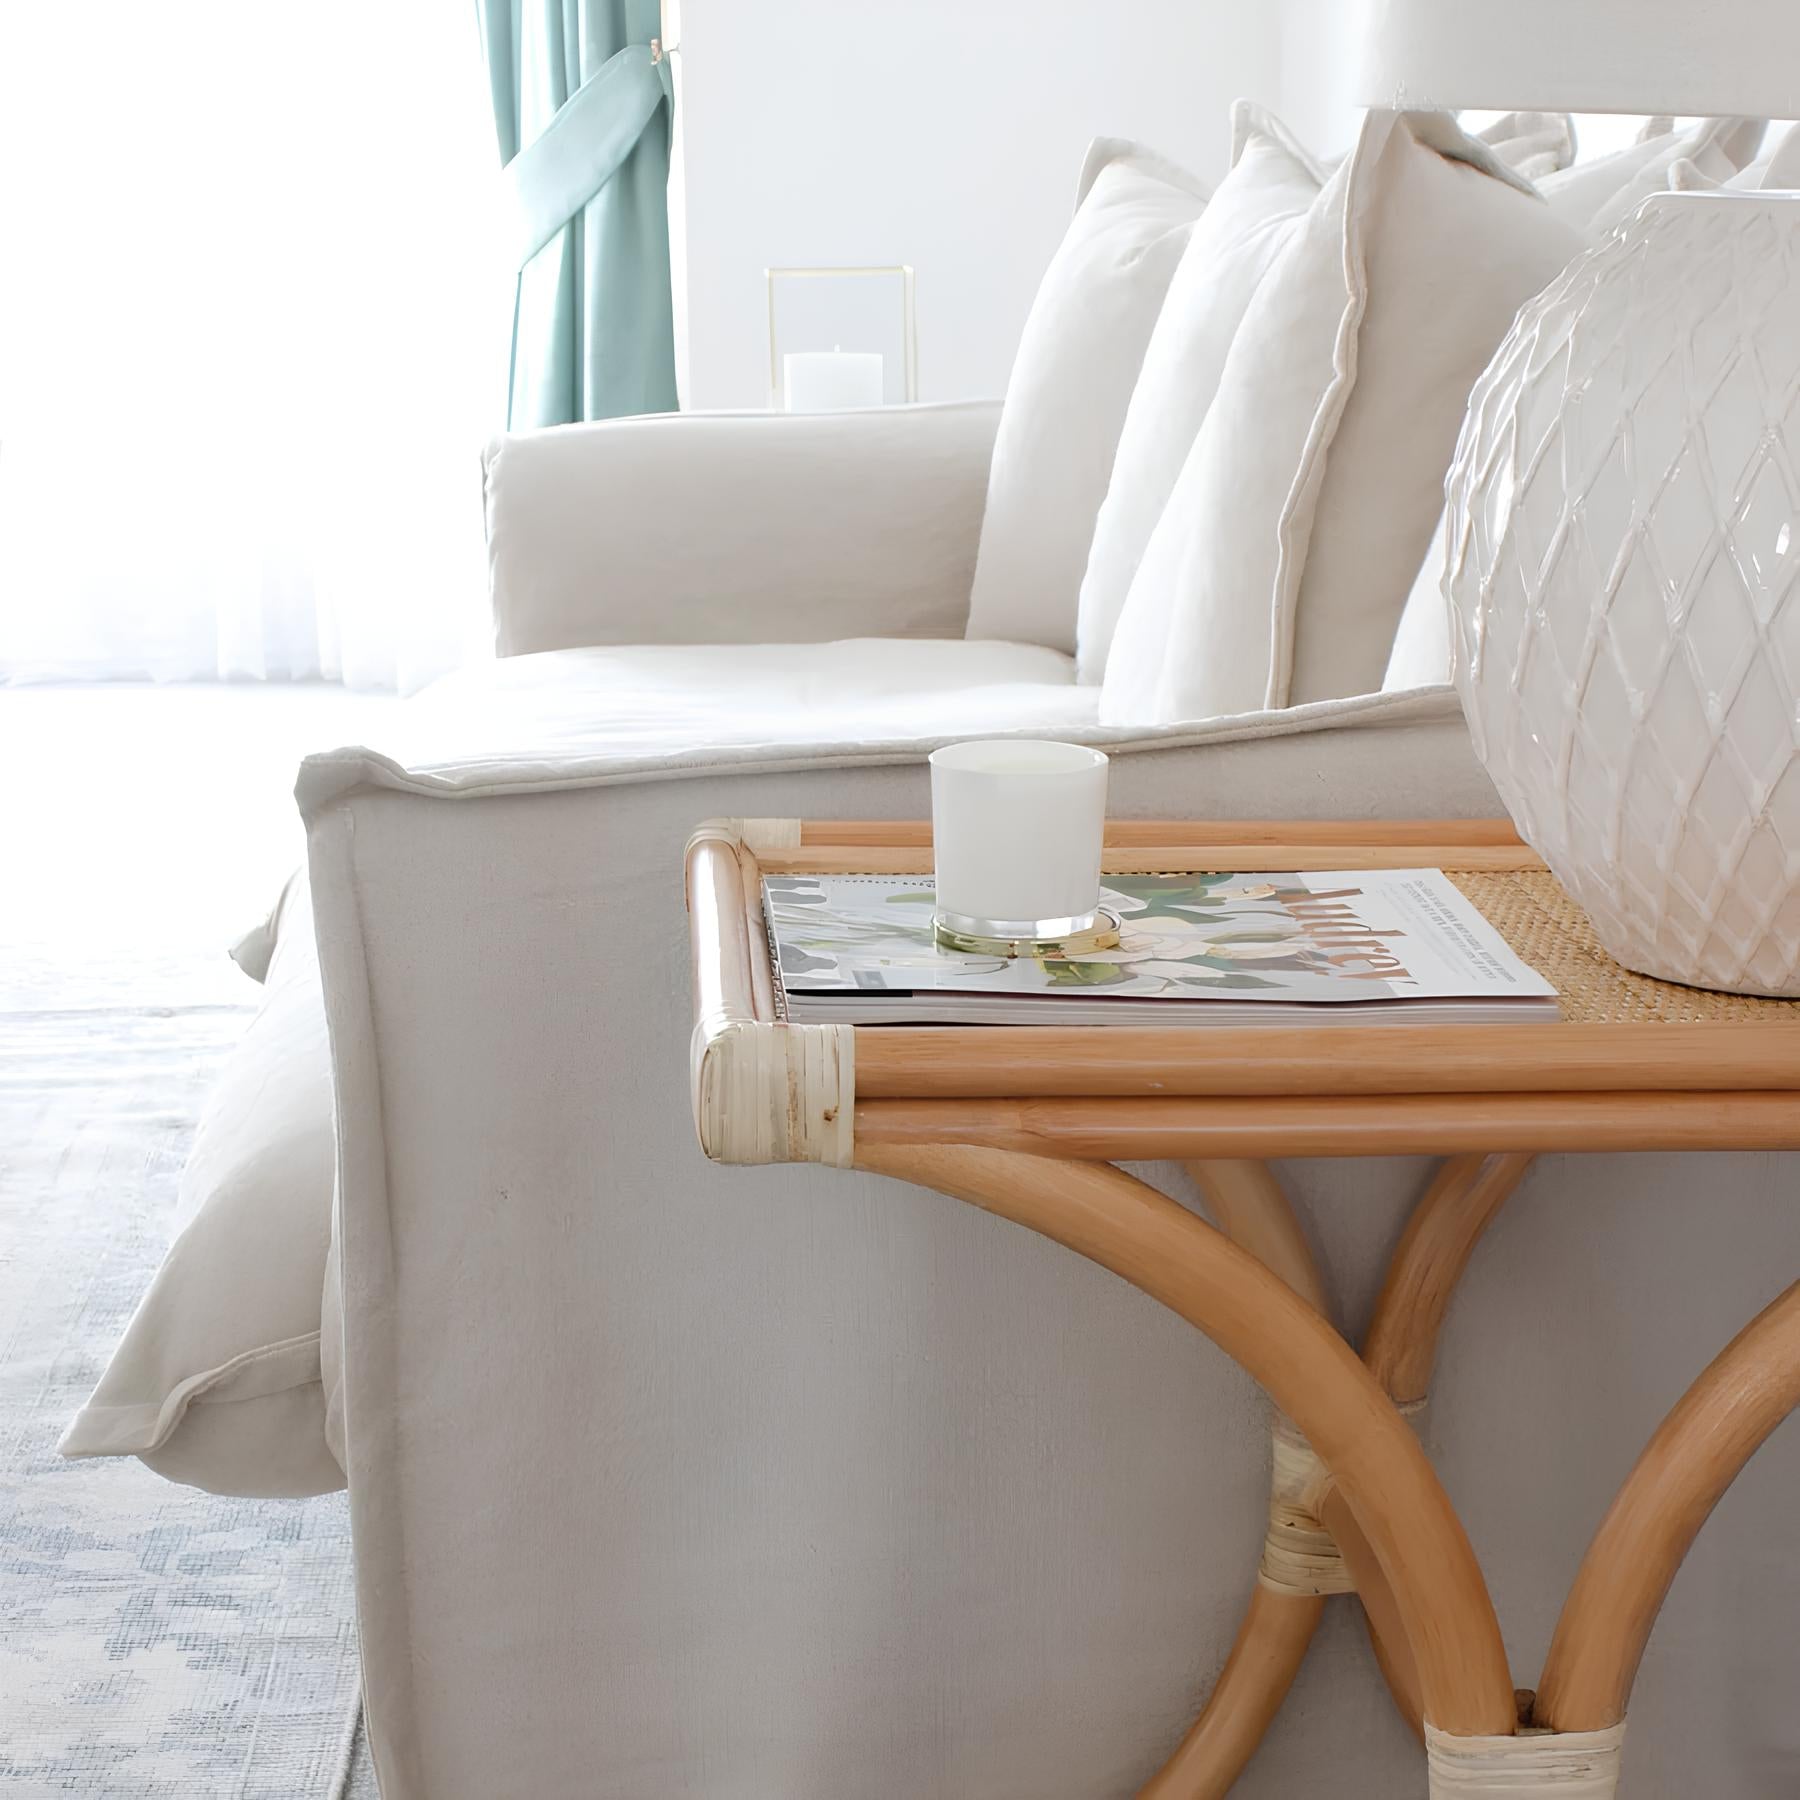 Rattan Bedside Table | Cane Side table | Bamboo table - Larisa - Akway